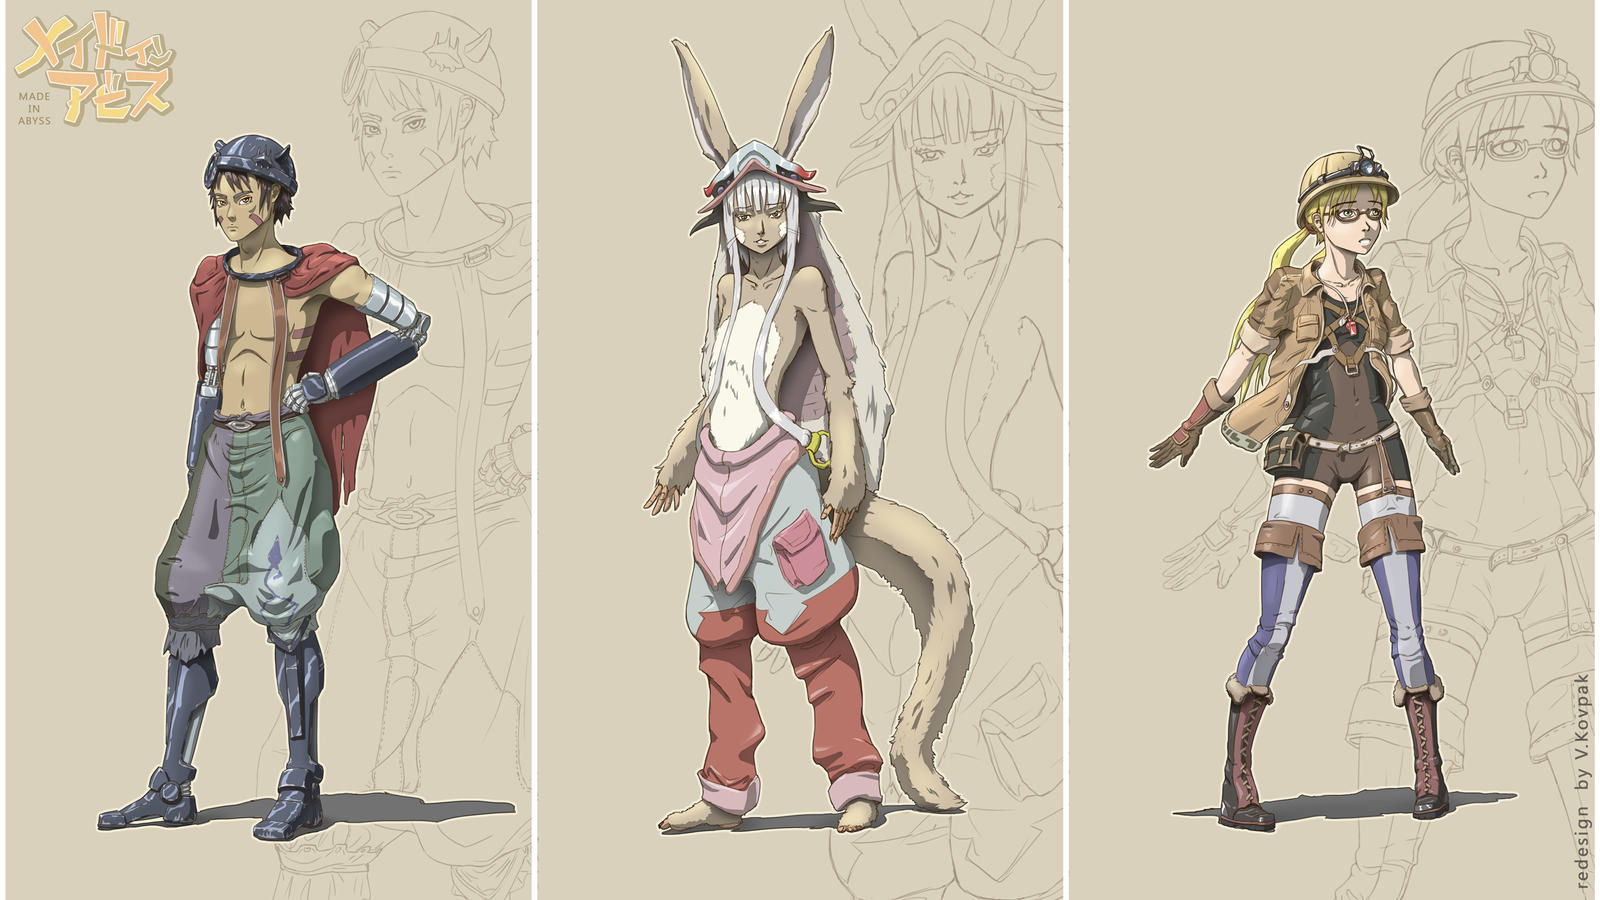 Character inspired by the anime 'made in abyss